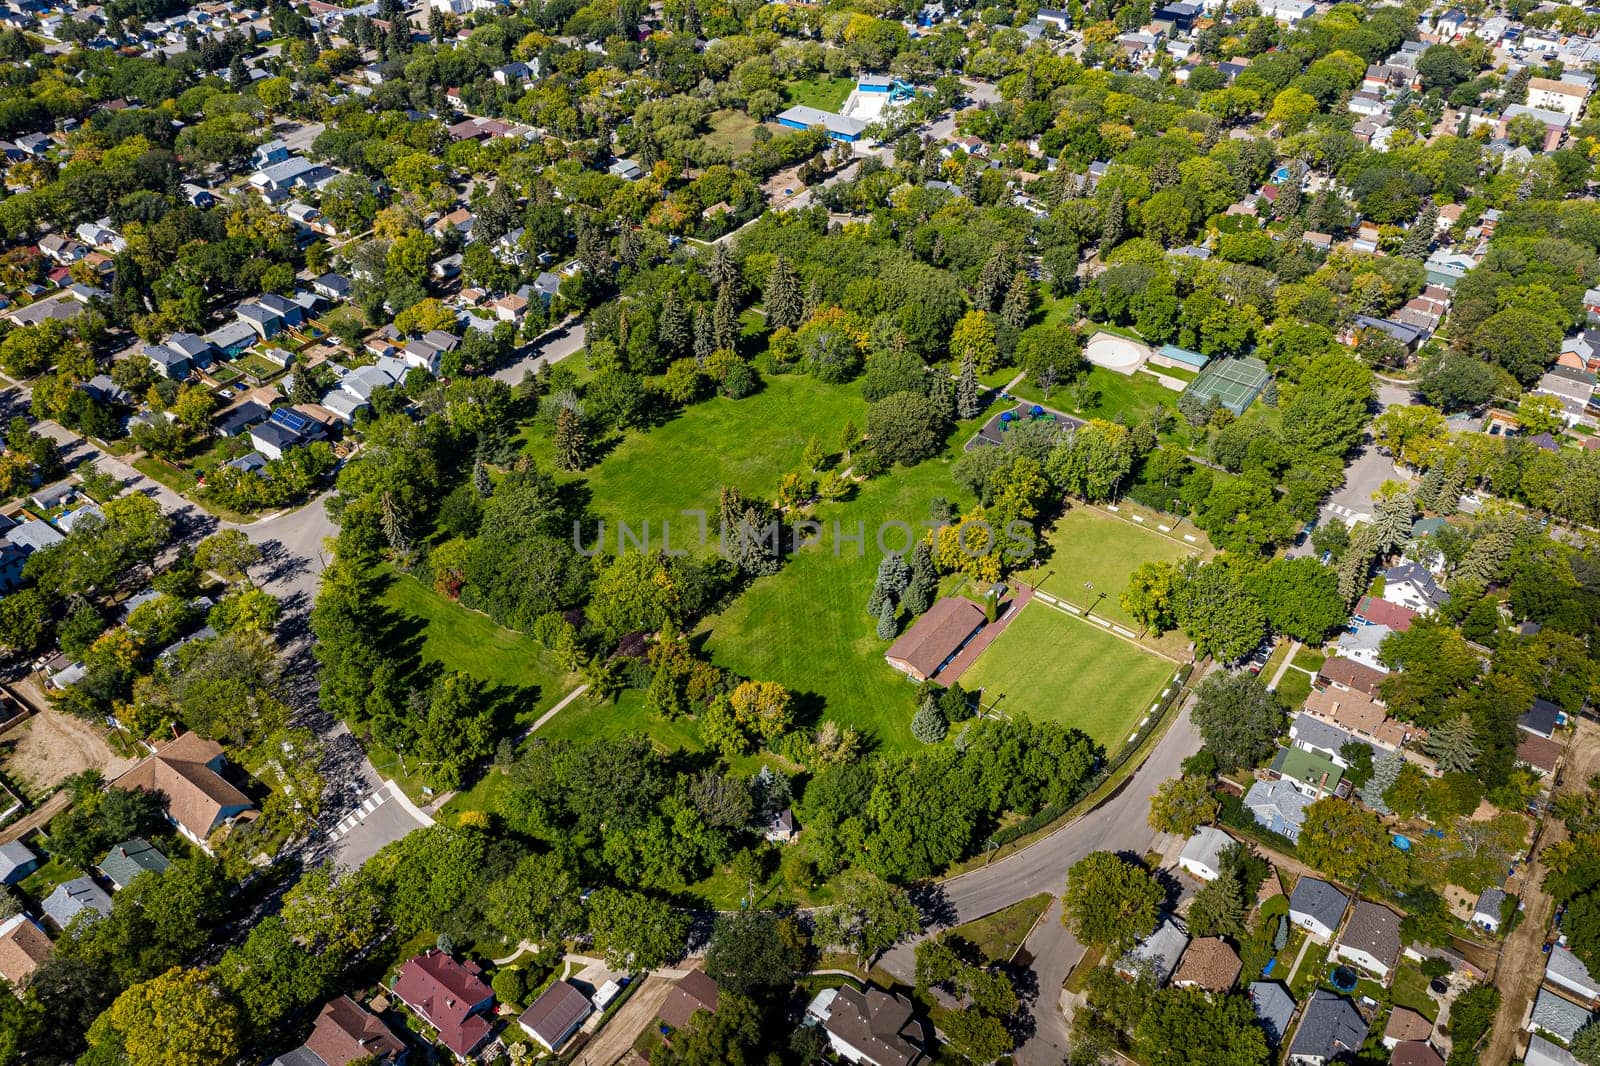 Discover the beauty of Ashworth Holmes Park in Saskatoon. This image showcases its sprawling lawns, vibrant playground, and inviting picnic spots, a beloved urban green space for all ages.